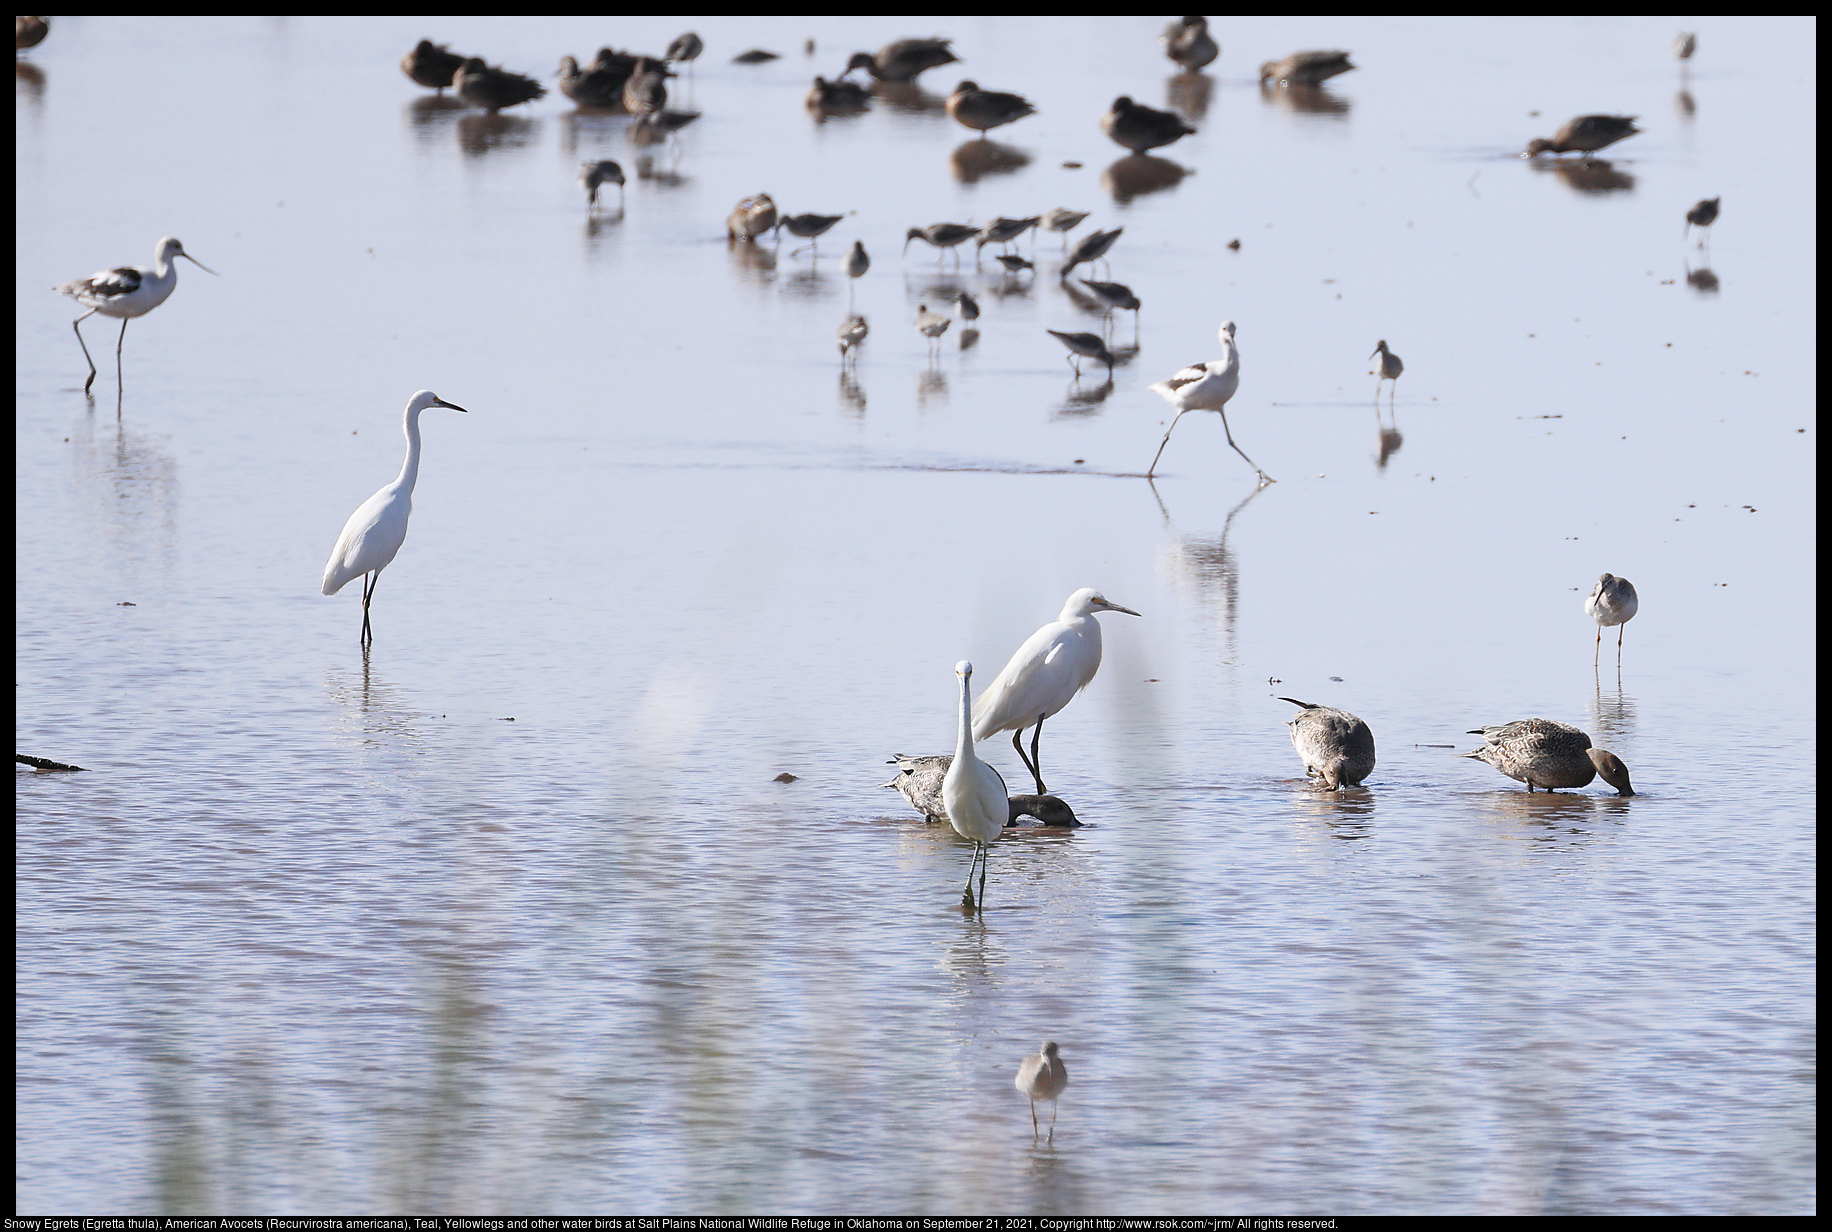 Snowy Egrets (Egretta thula), American Avocets (Recurvirostra americana), Teal, Yellowlegs and other water birds at Salt Plains National Wildlife Refuge in Oklahoma on September 21, 2021